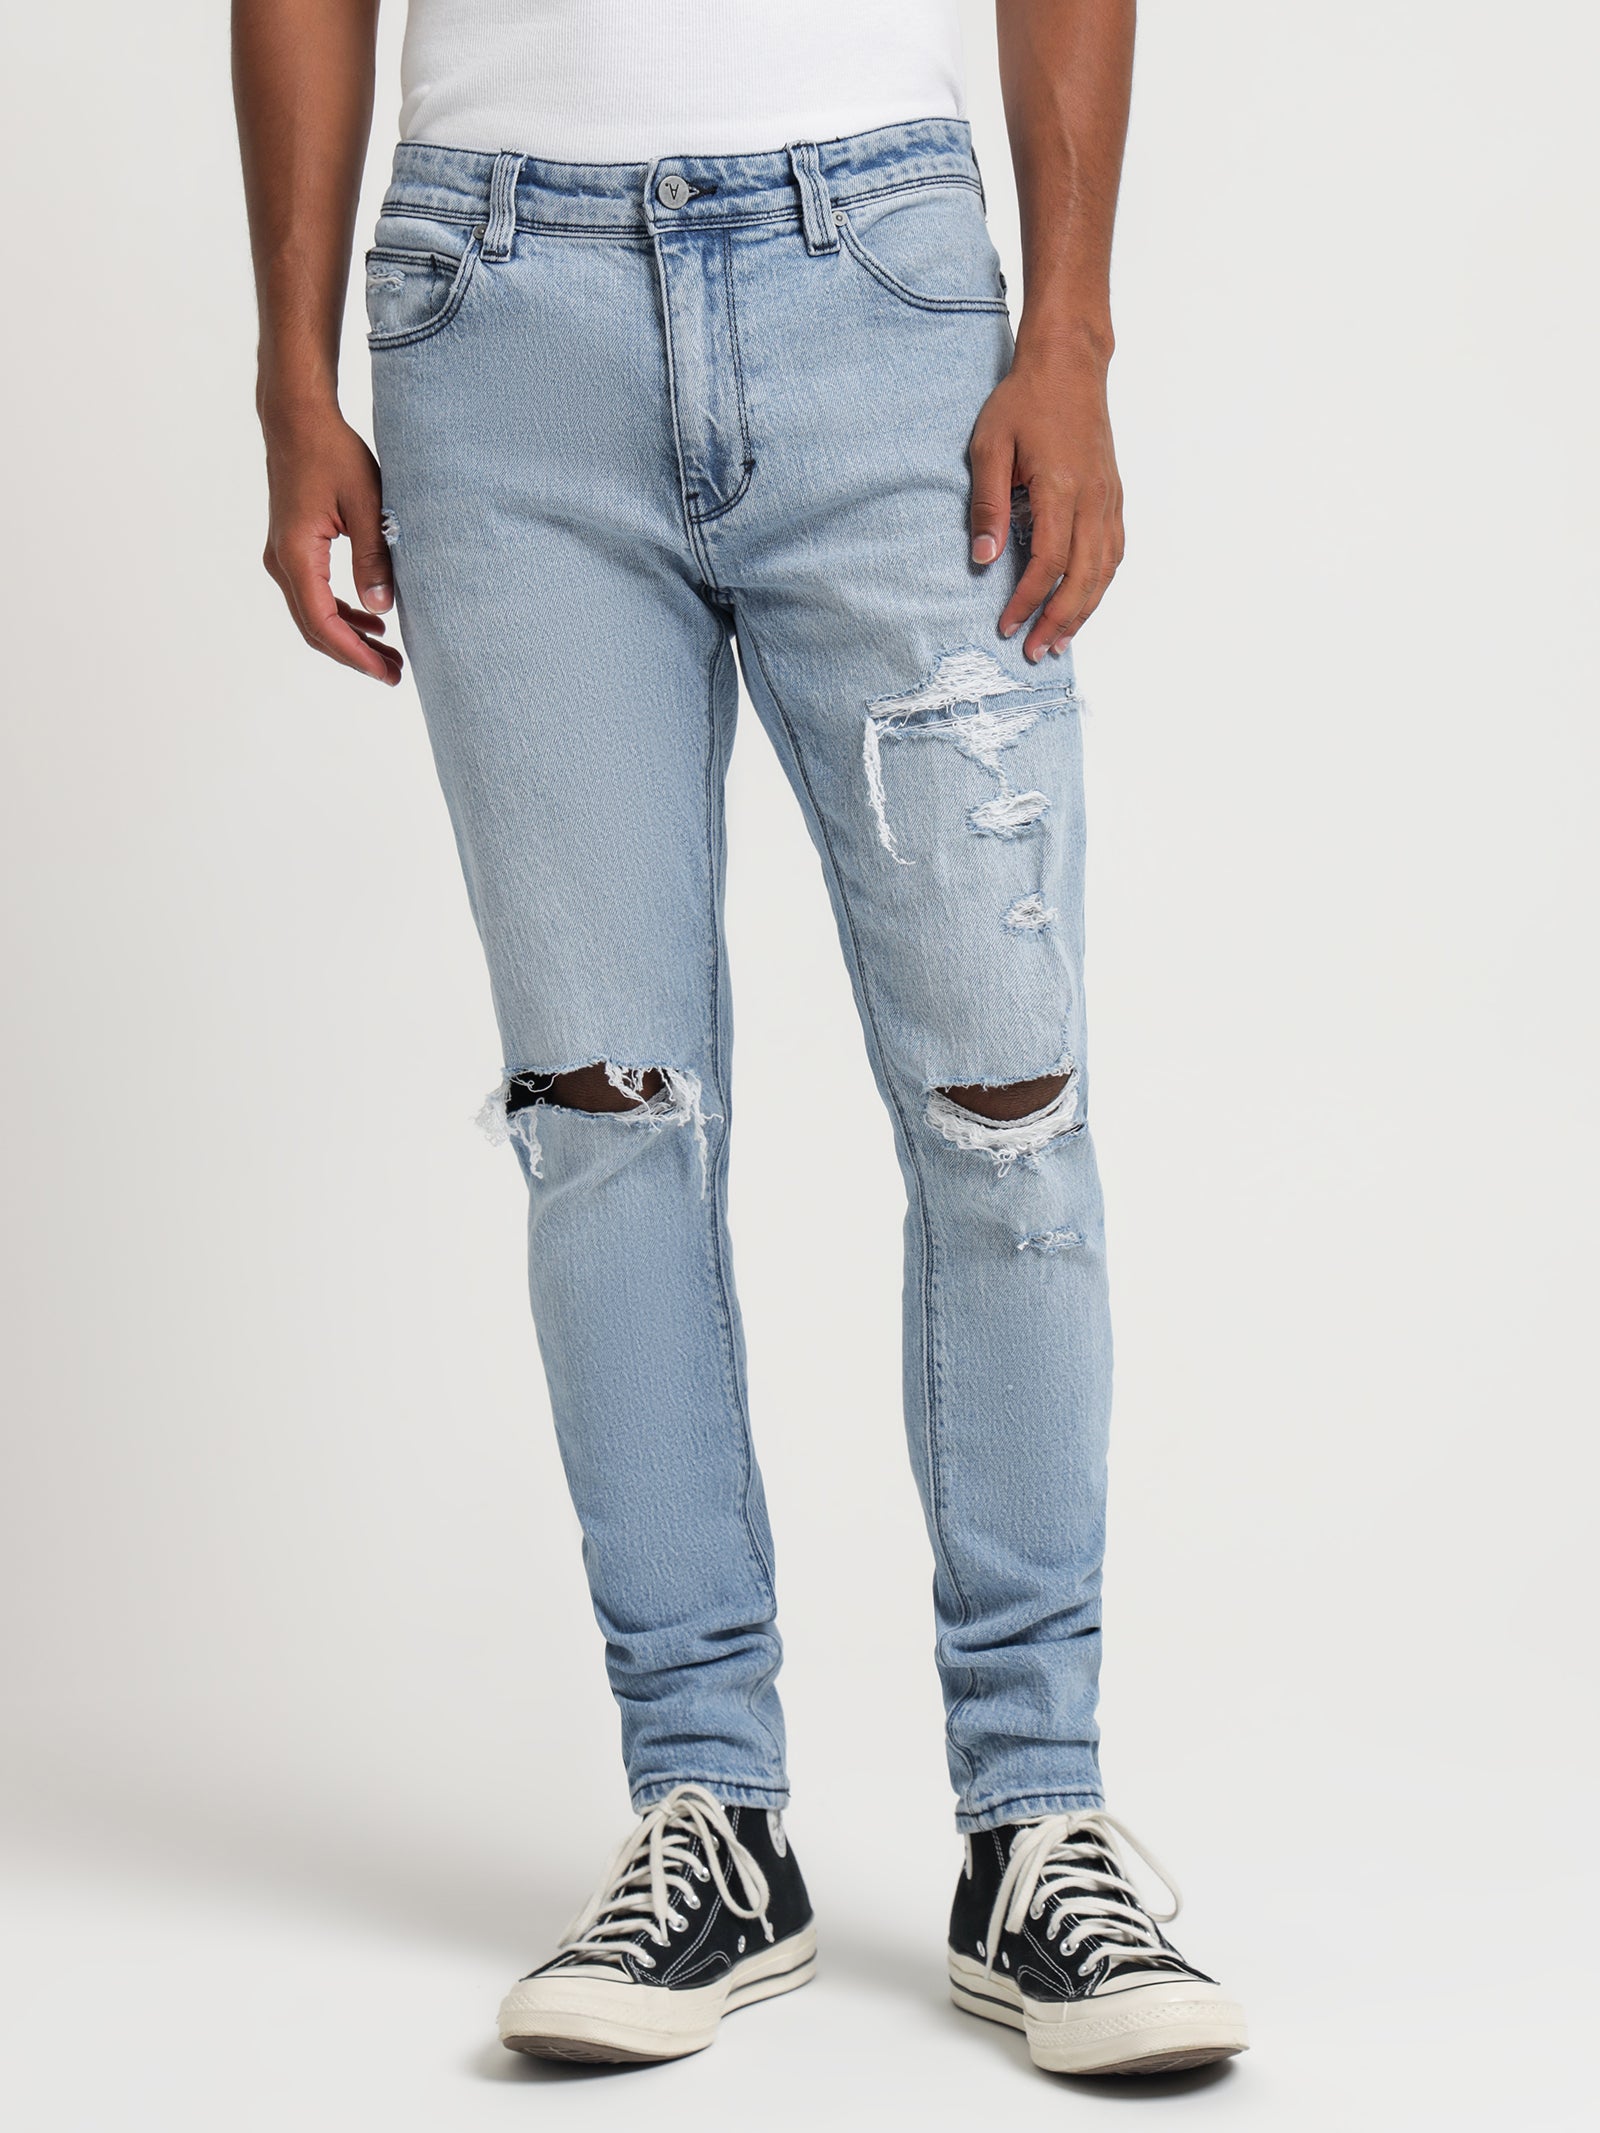 Dropped Skinny Stacked Butter Blues Shred Jeans in Denim - Glue Store